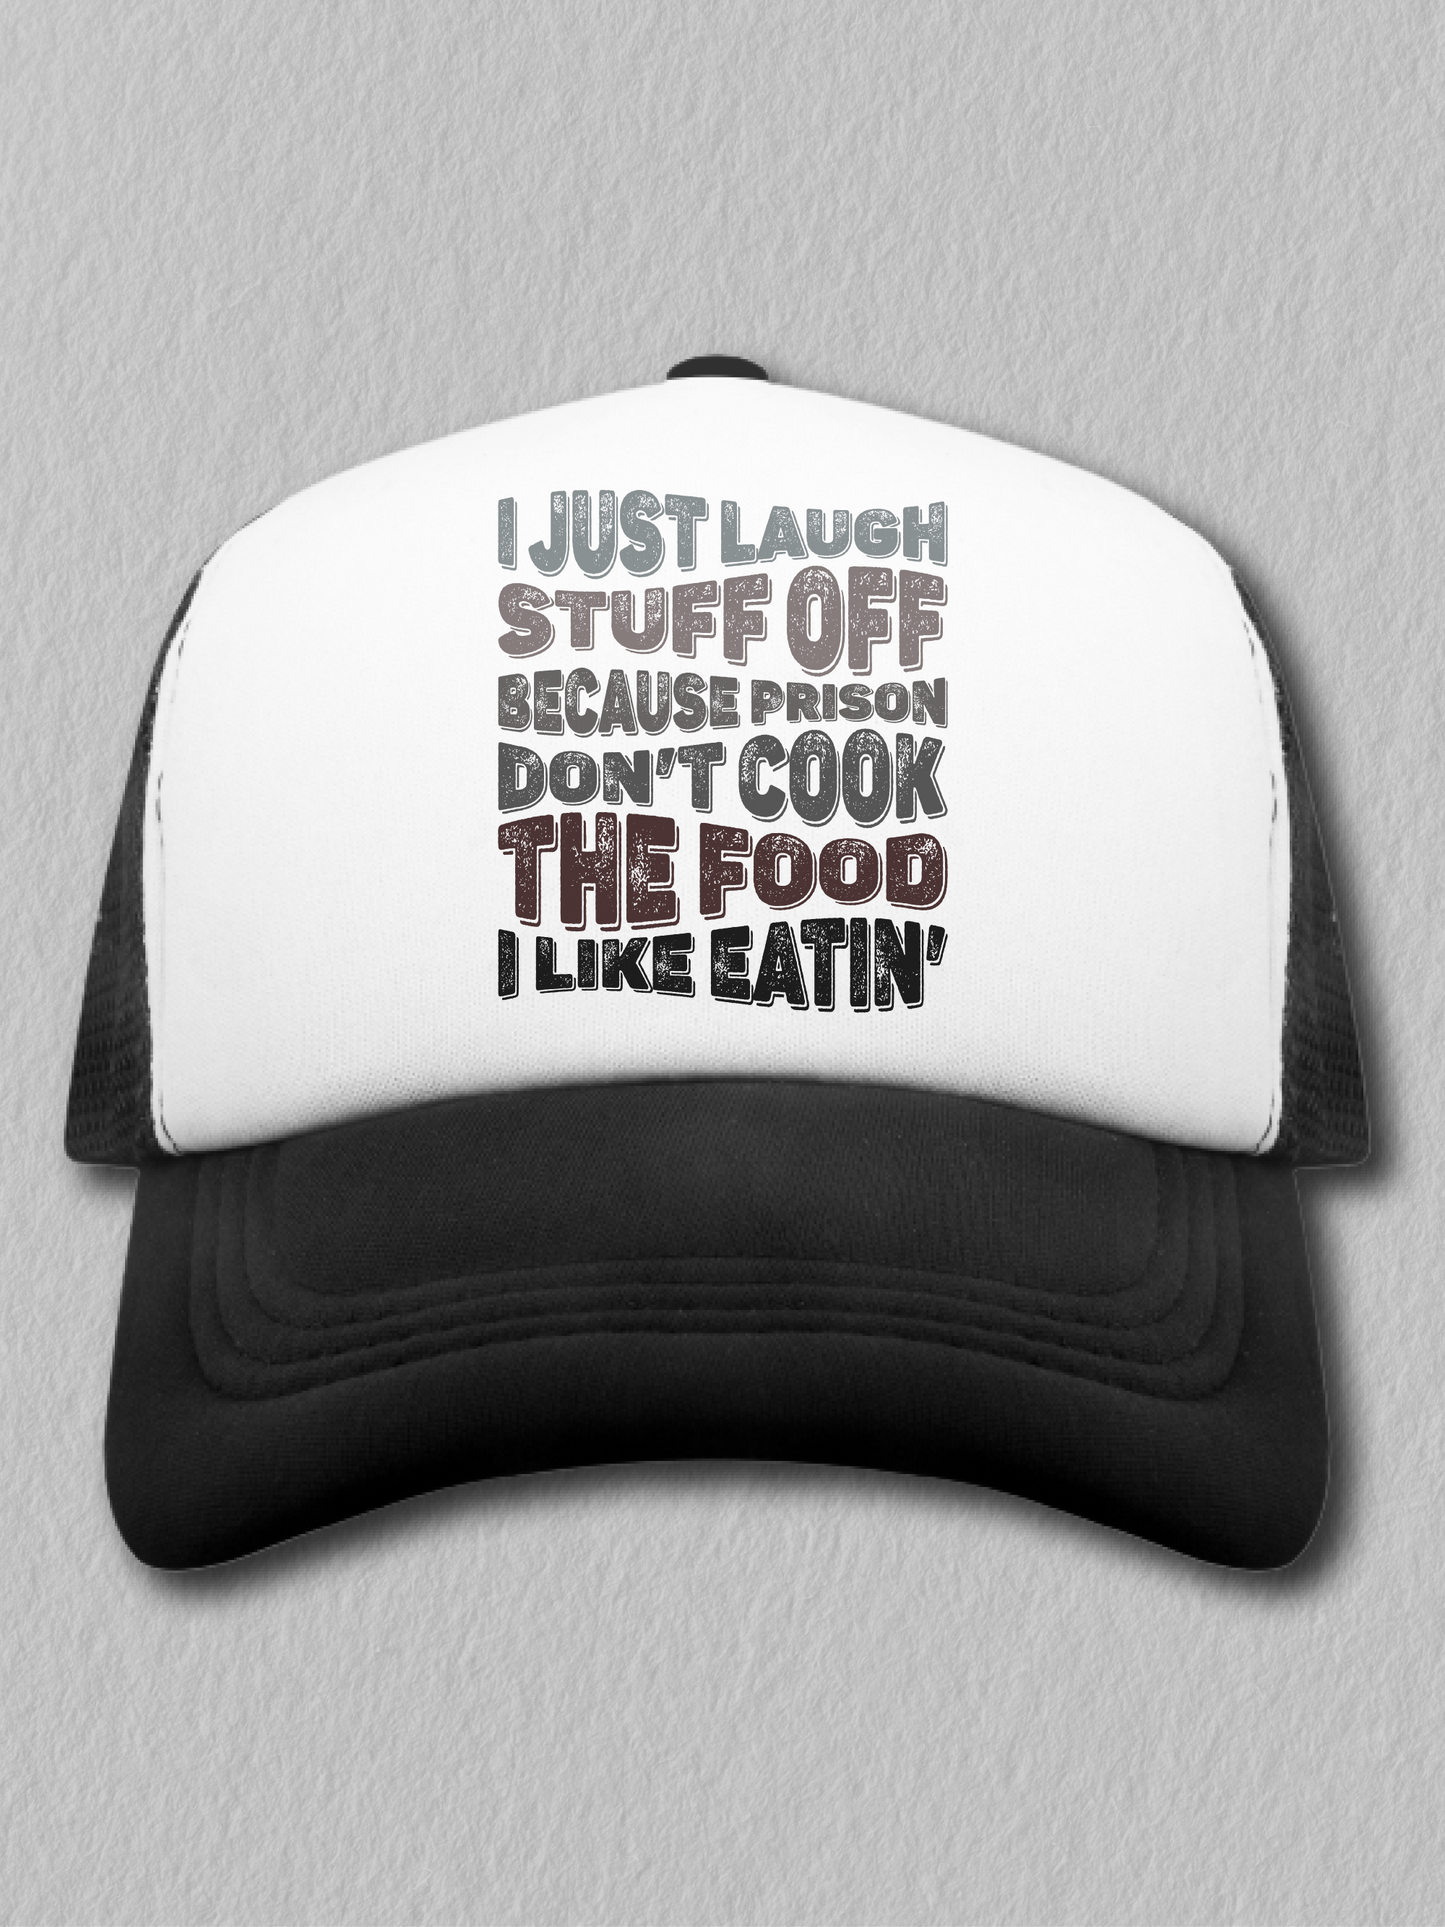 I Just Laugh Stuff Off Because Prison Don't Cook The Food I Like Eatin' (Hat)